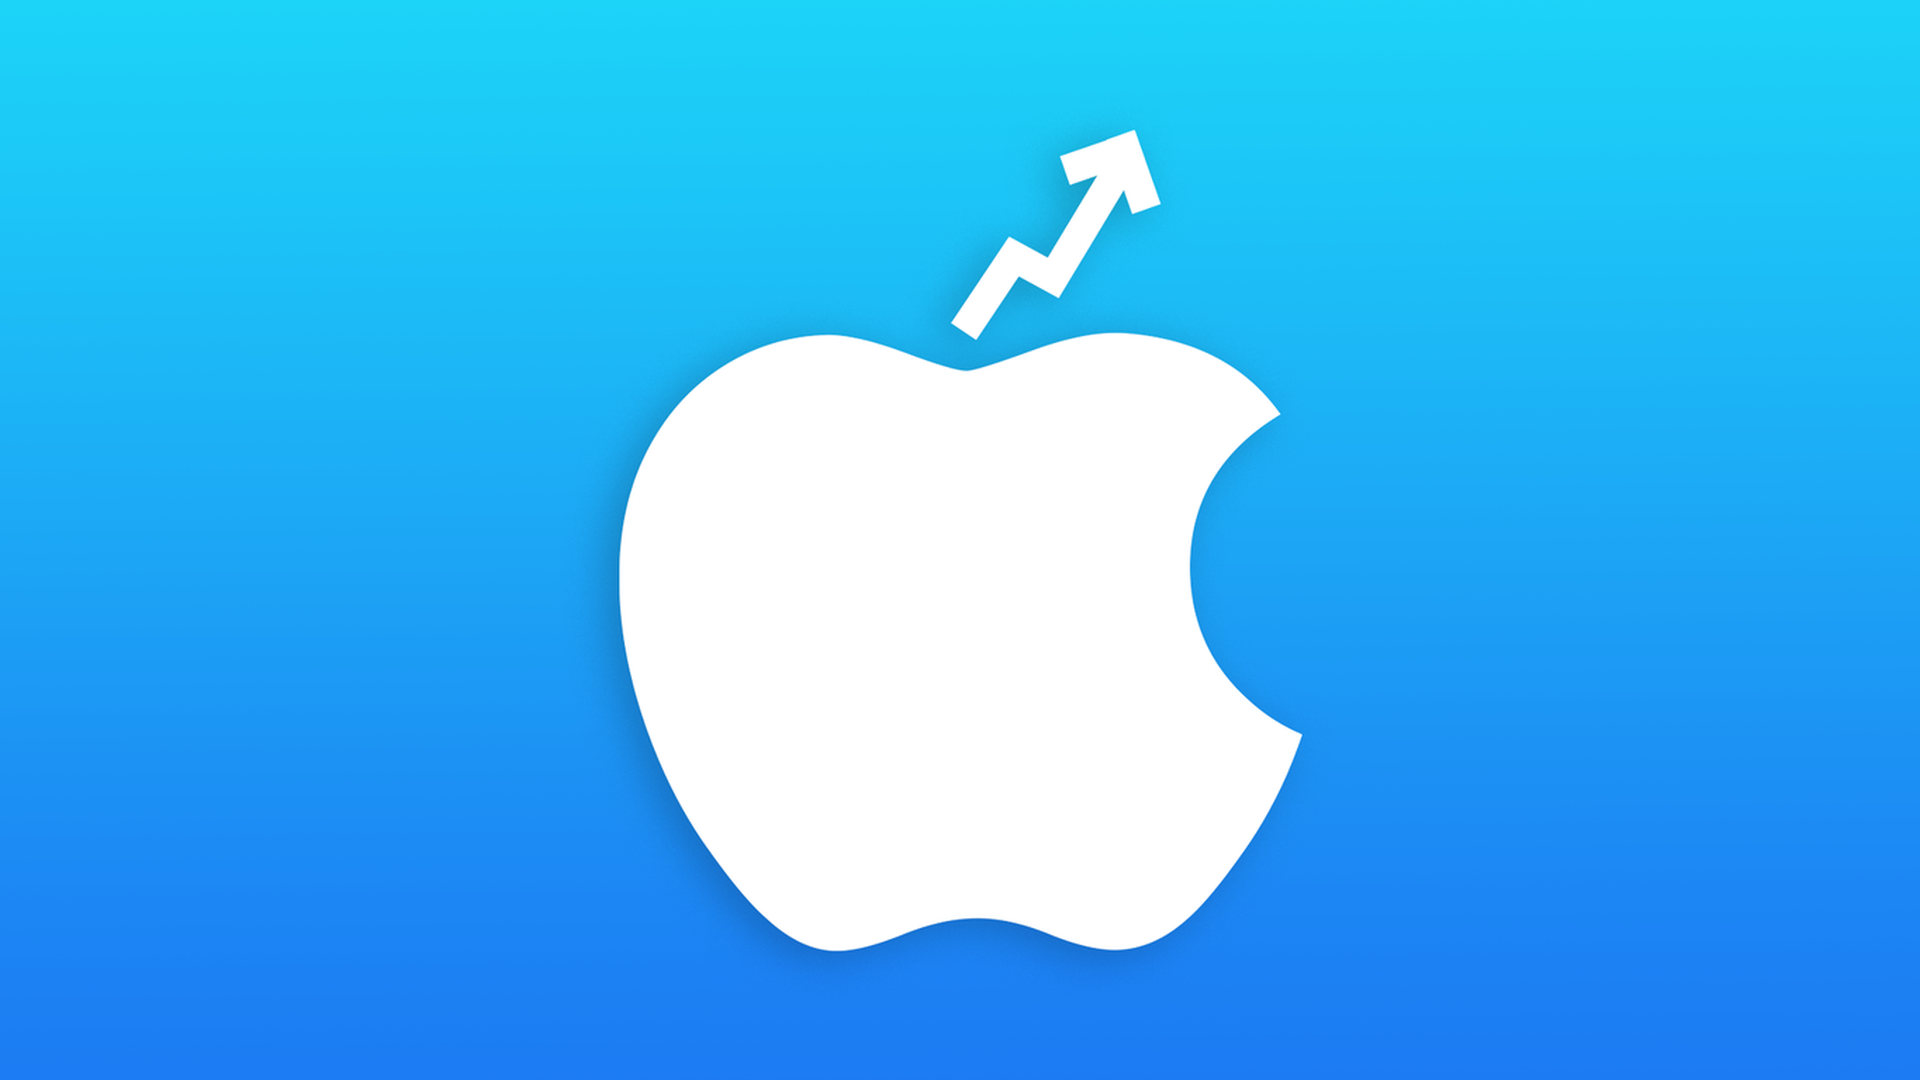 An illustration of the Apple logo with an upward stock arrow replacing the stem